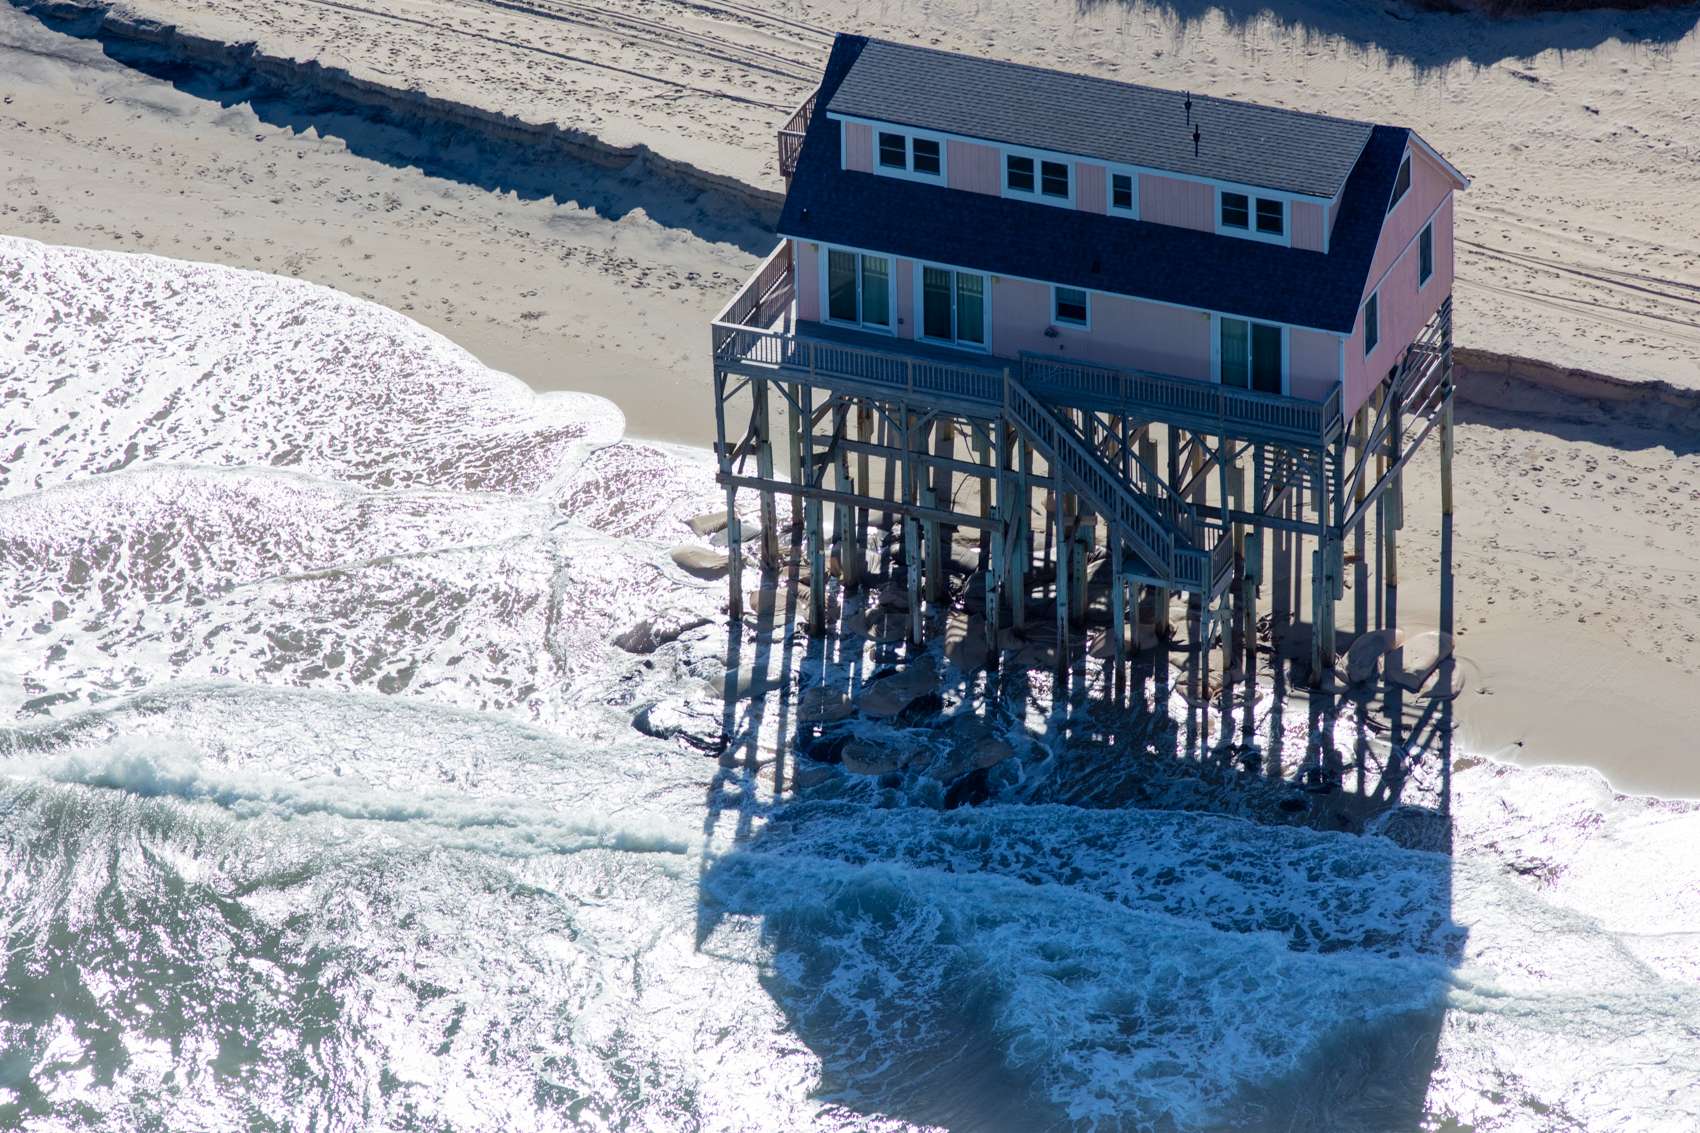 Houses in Nags Head, North Carolina raised on stilts to protect against flooding. Property owners have watched their beaches slip away, and residences that once stood on stable ground are now randomly scattered in the surf zone due to erosion.